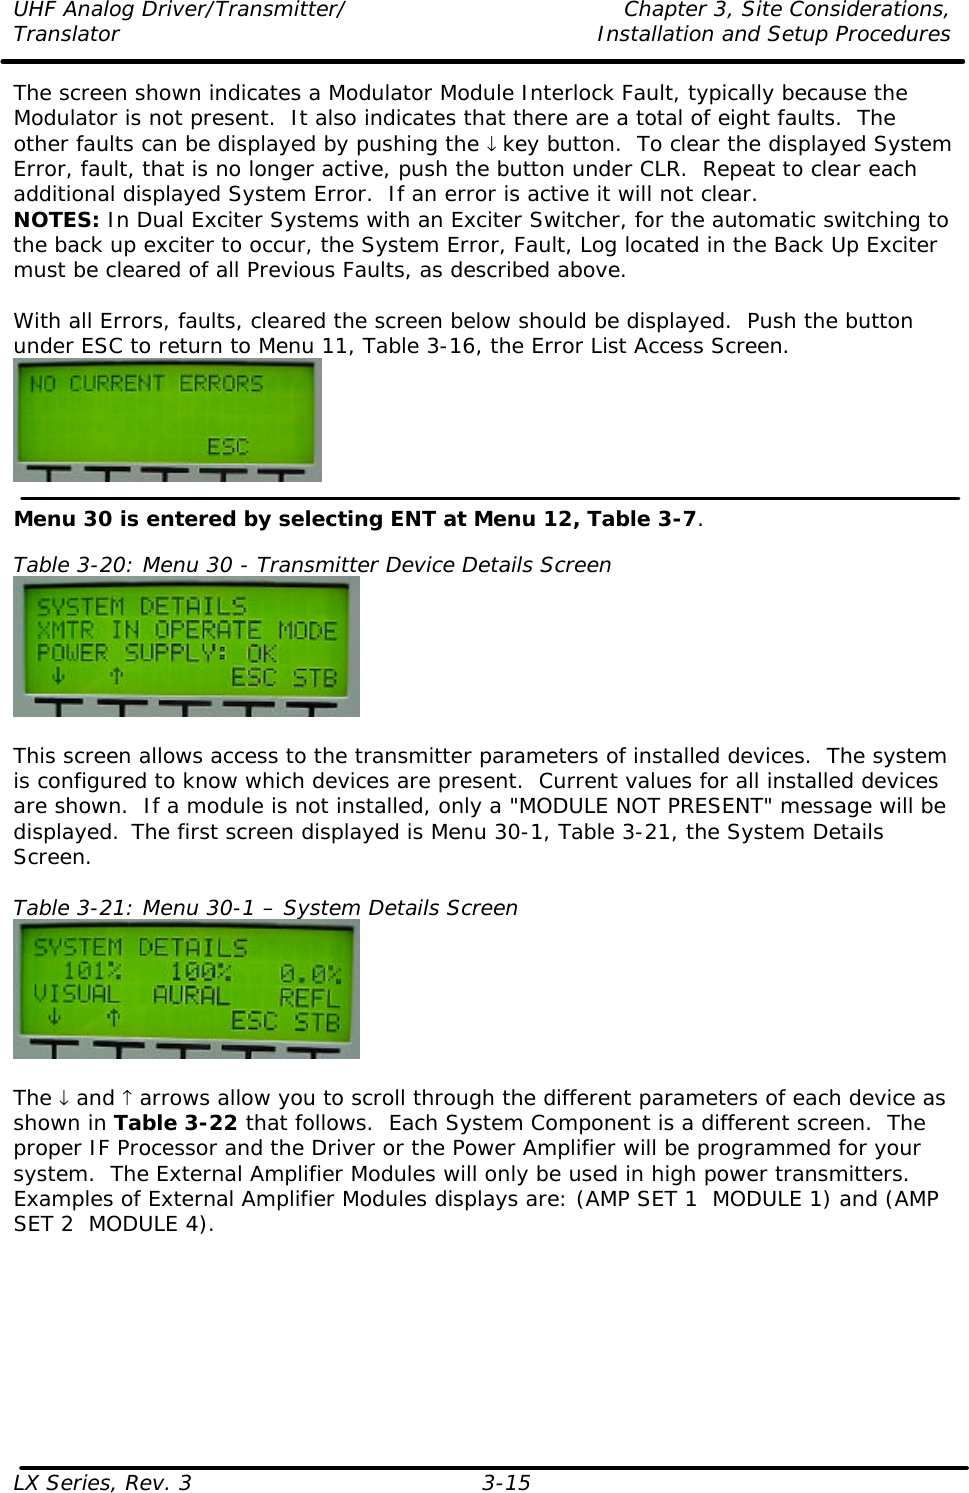 UHF Analog Driver/Transmitter/ Chapter 3, Site Considerations,  Translator Installation and Setup Procedures LX Series, Rev. 3 3-15 The screen shown indicates a Modulator Module Interlock Fault, typically because the Modulator is not present.  It also indicates that there are a total of eight faults.  The other faults can be displayed by pushing the ↓ key button.  To clear the displayed System Error, fault, that is no longer active, push the button under CLR.  Repeat to clear each additional displayed System Error.  If an error is active it will not clear. NOTES: In Dual Exciter Systems with an Exciter Switcher, for the automatic switching to the back up exciter to occur, the System Error, Fault, Log located in the Back Up Exciter must be cleared of all Previous Faults, as described above.  With all Errors, faults, cleared the screen below should be displayed.  Push the button under ESC to return to Menu 11, Table 3-16, the Error List Access Screen.   Menu 30 is entered by selecting ENT at Menu 12, Table 3-7.  Table 3-20: Menu 30 - Transmitter Device Details Screen   This screen allows access to the transmitter parameters of installed devices.  The system is configured to know which devices are present.  Current values for all installed devices are shown.  If a module is not installed, only a &quot;MODULE NOT PRESENT&quot; message will be displayed.  The first screen displayed is Menu 30-1, Table 3-21, the System Details Screen.  Table 3-21: Menu 30-1 – System Details Screen   The ↓ and ↑ arrows allow you to scroll through the different parameters of each device as shown in Table 3-22 that follows.  Each System Component is a different screen.  The proper IF Processor and the Driver or the Power Amplifier will be programmed for your system.  The External Amplifier Modules will only be used in high power transmitters.  Examples of External Amplifier Modules displays are: (AMP SET 1  MODULE 1) and (AMP SET 2  MODULE 4). 